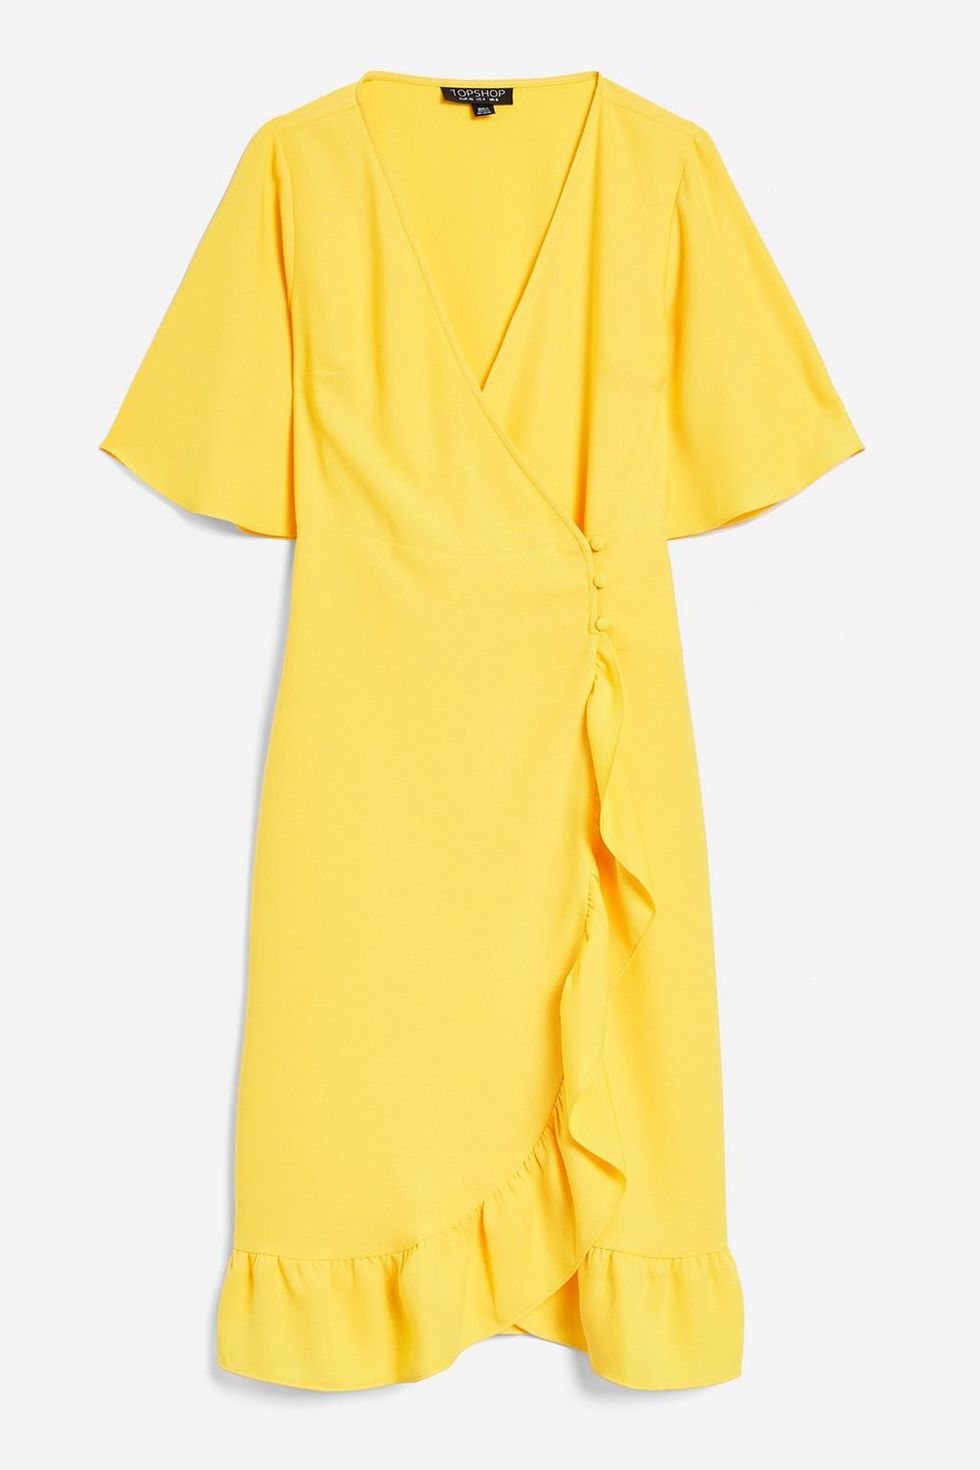 Clothing, Yellow, Day dress, Dress, Sleeve, Neck, Cover-up, Cocktail dress, 